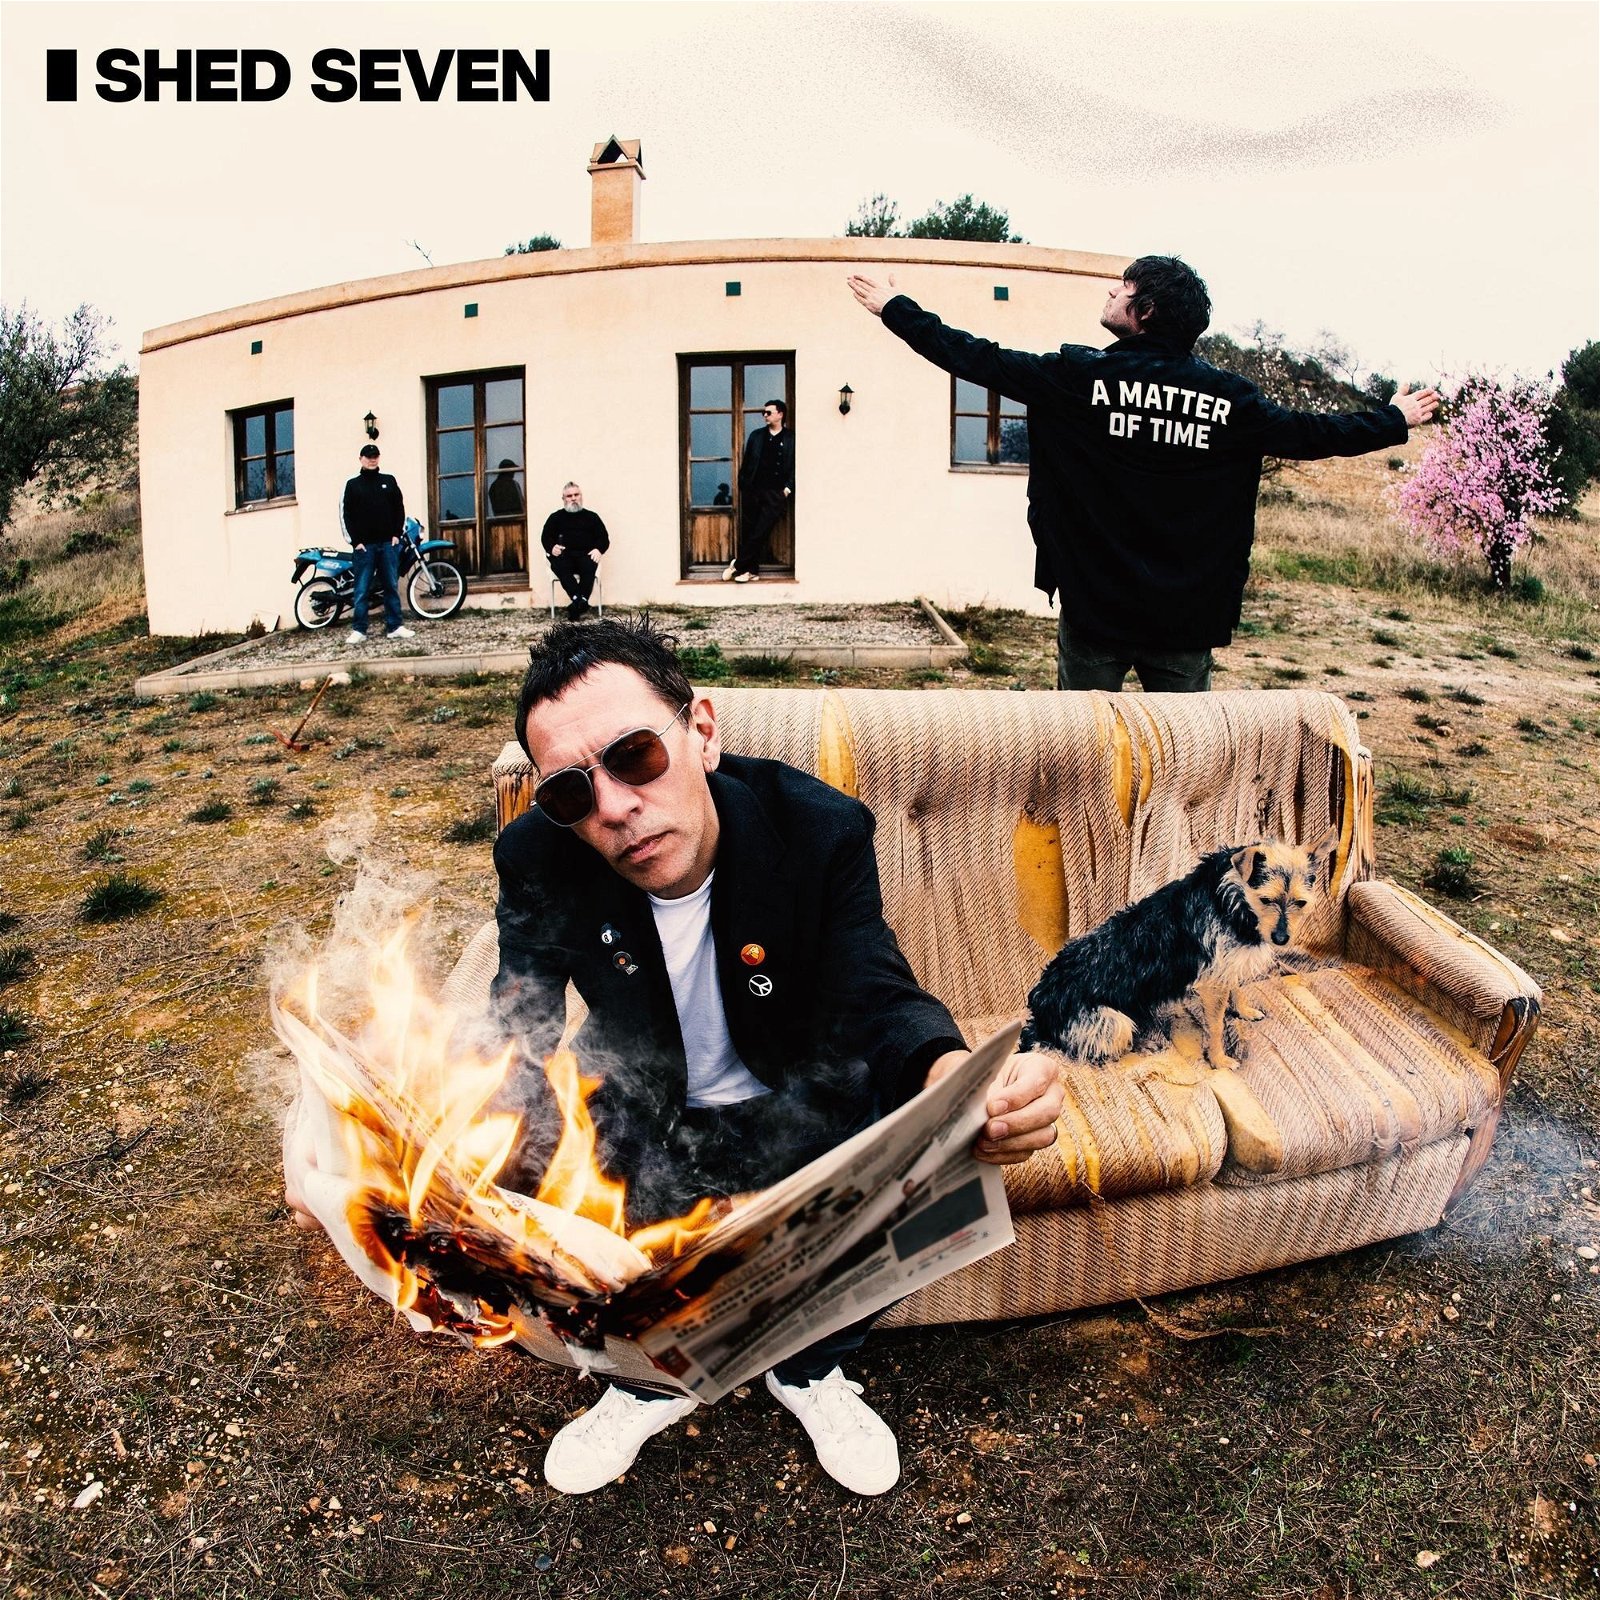 CD Shop - SHED SEVEN A MATTER OF TIME